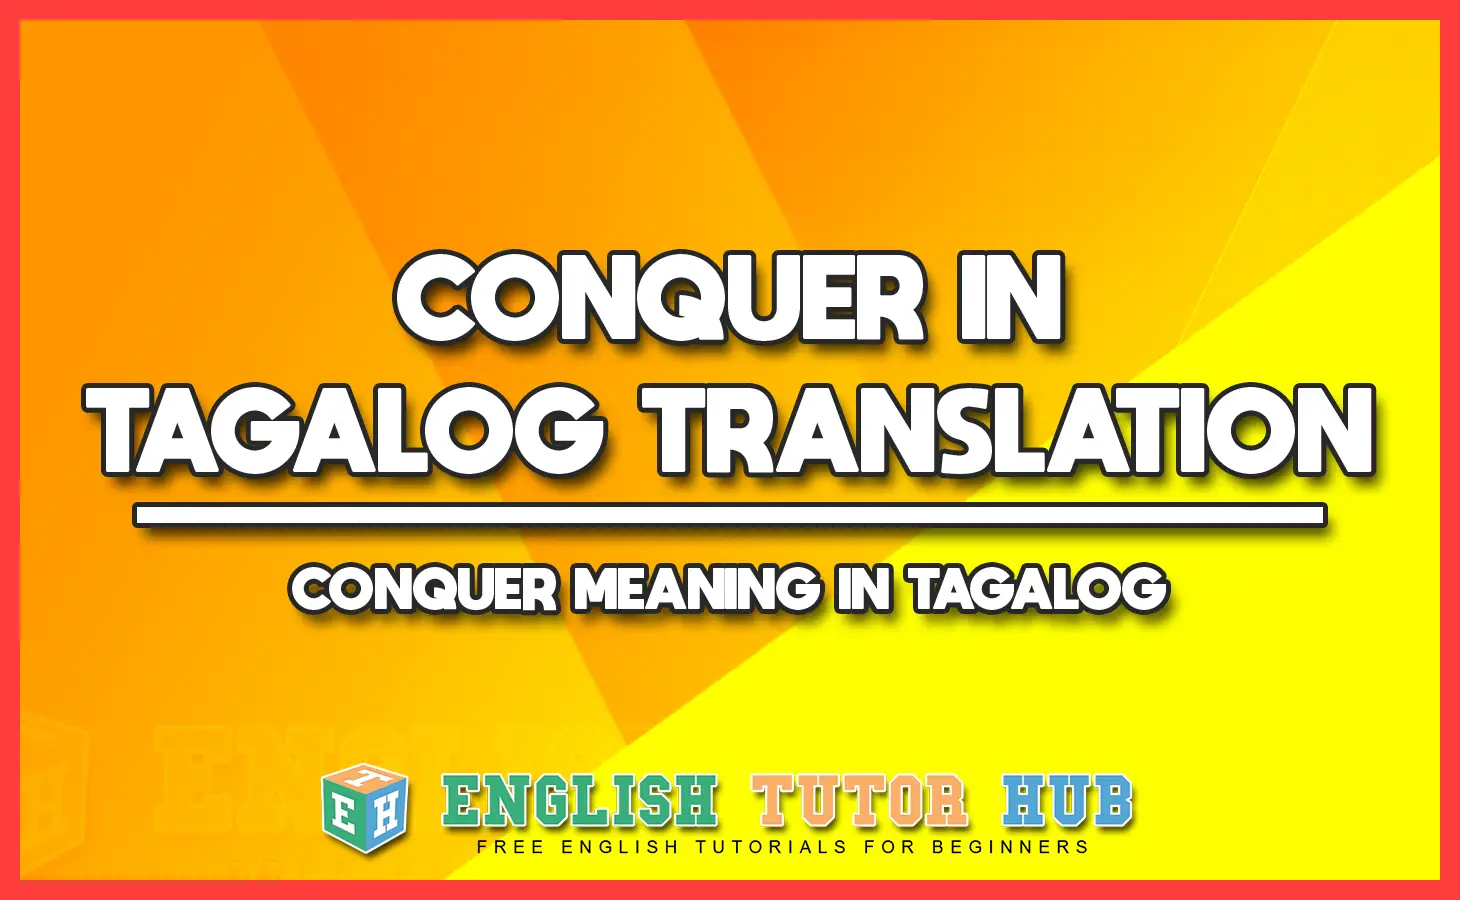 CONQUER IN TAGALOG TRANSLATION - CONQUER MEANING IN TAGALOG